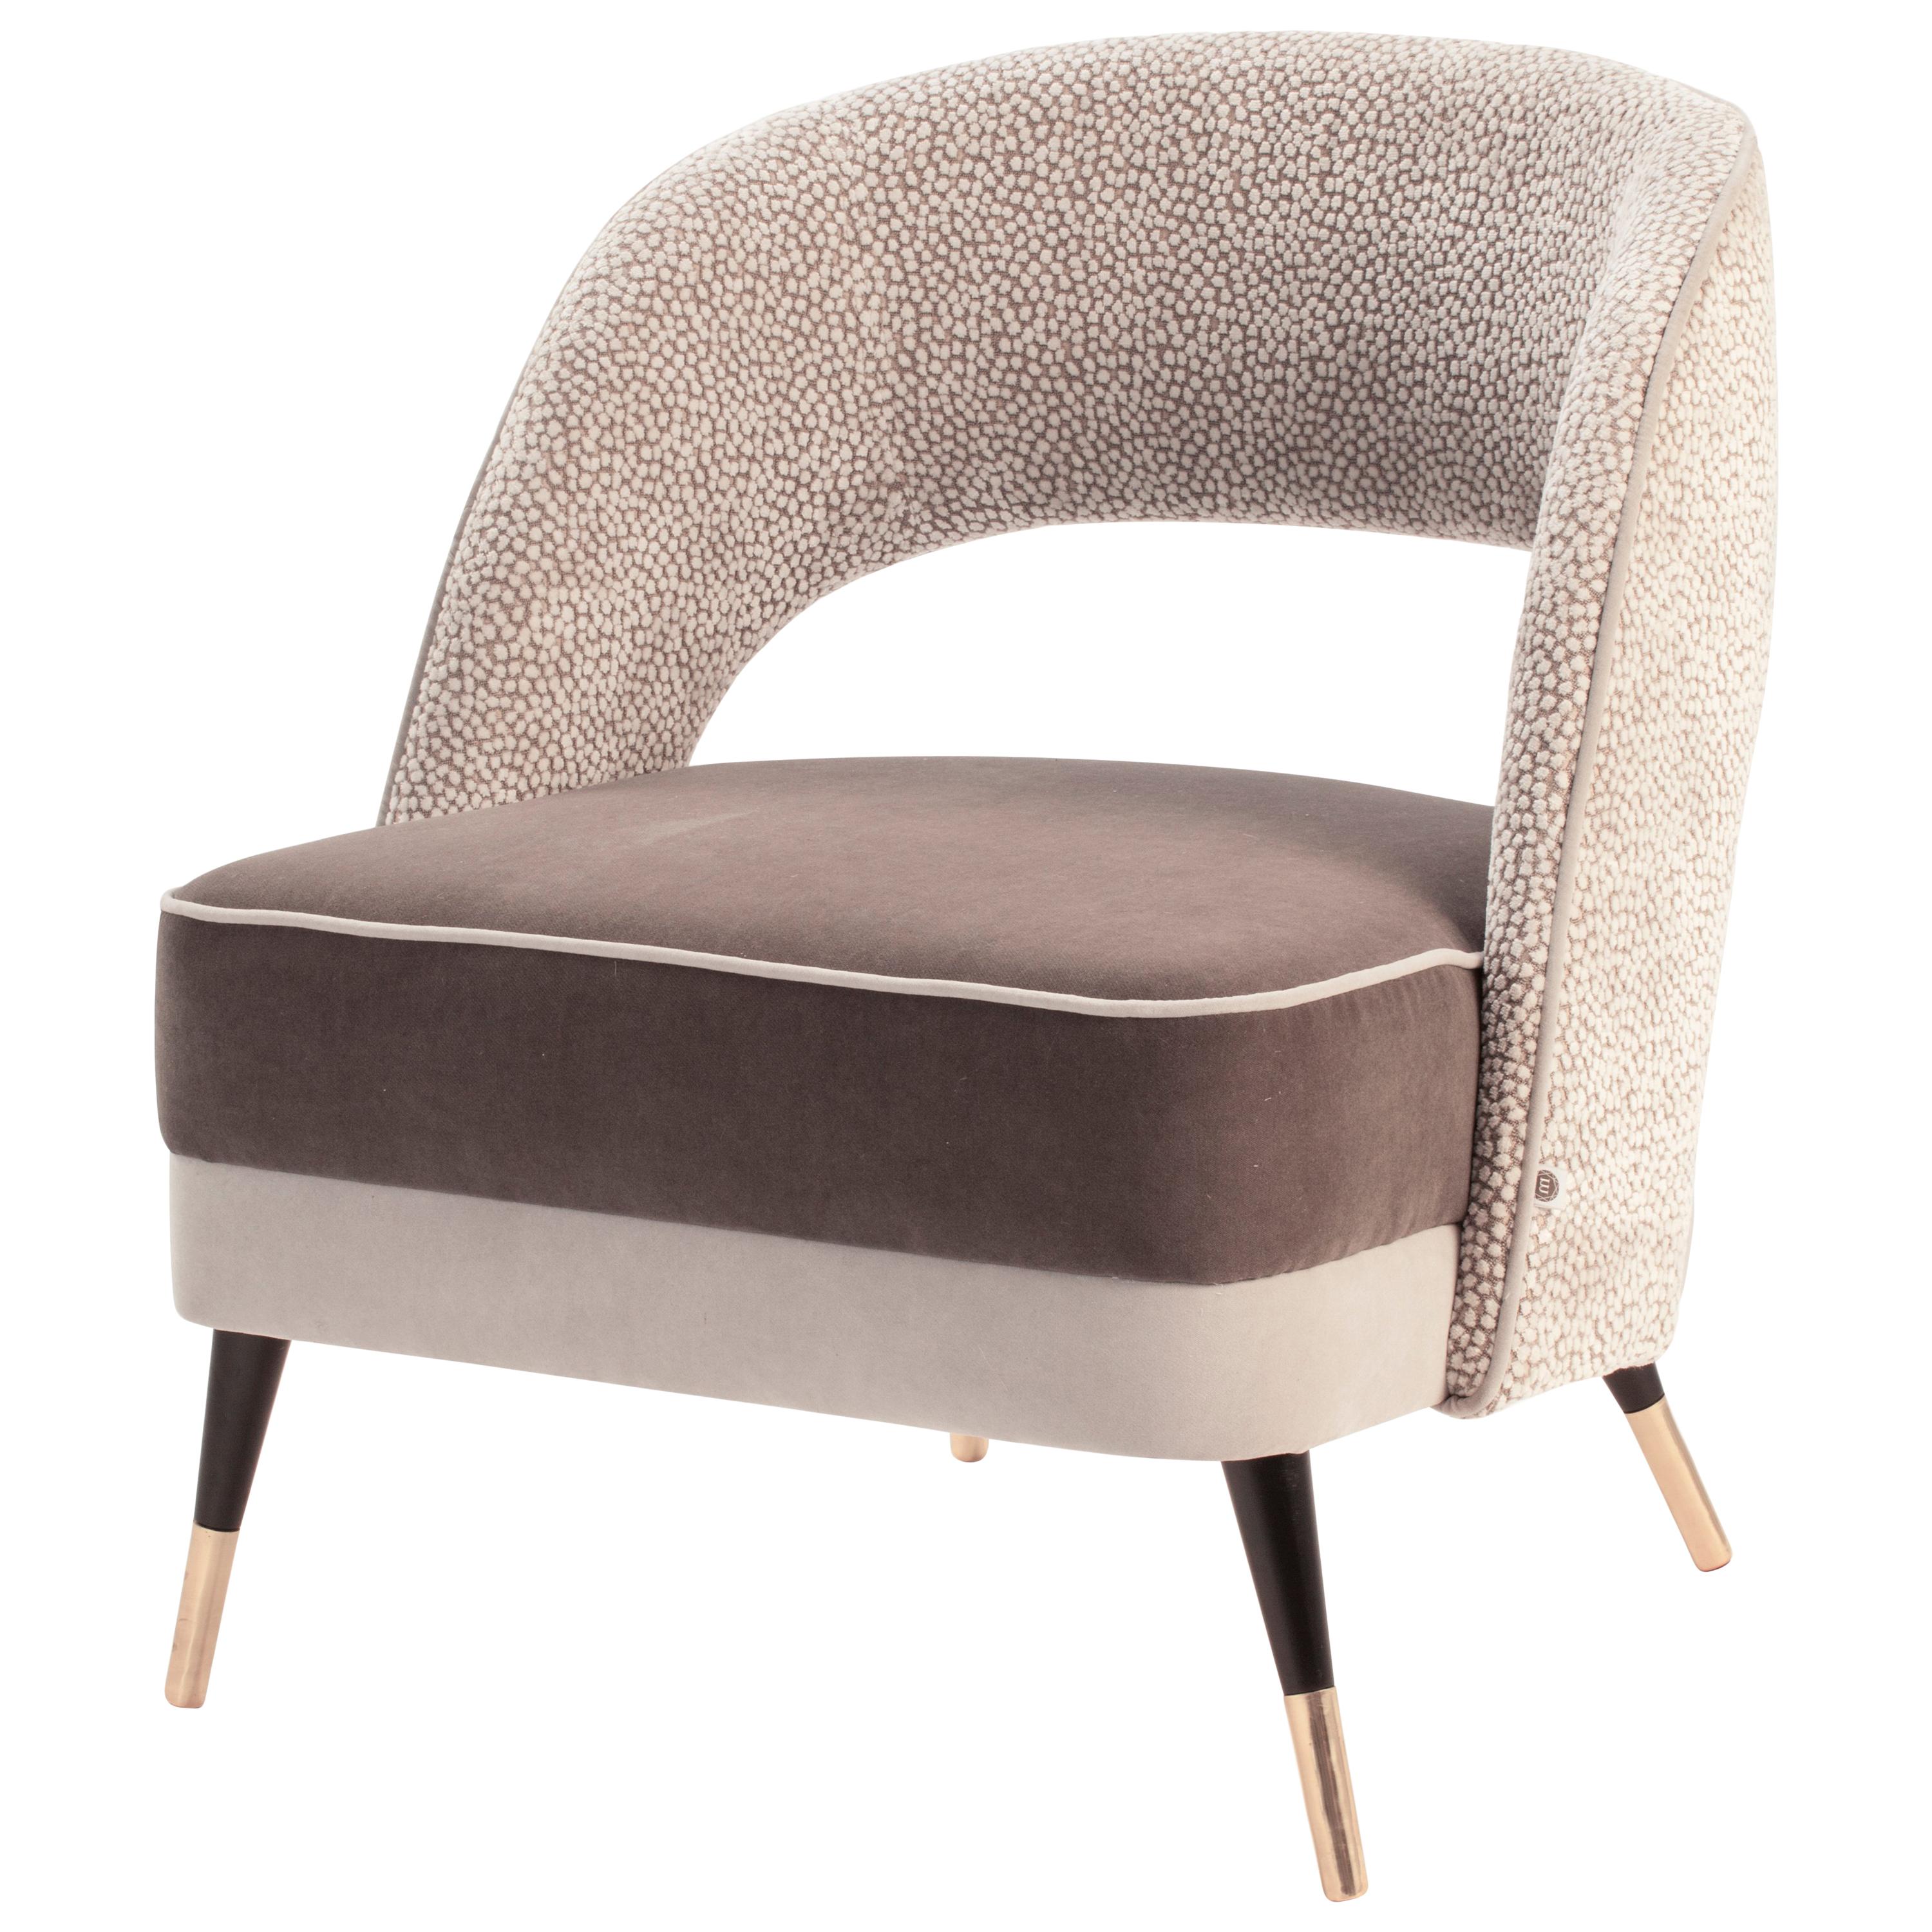 Ava Armchair Brass Fittings Soft Marrom Seat and Textured Beige Backrest For Sale